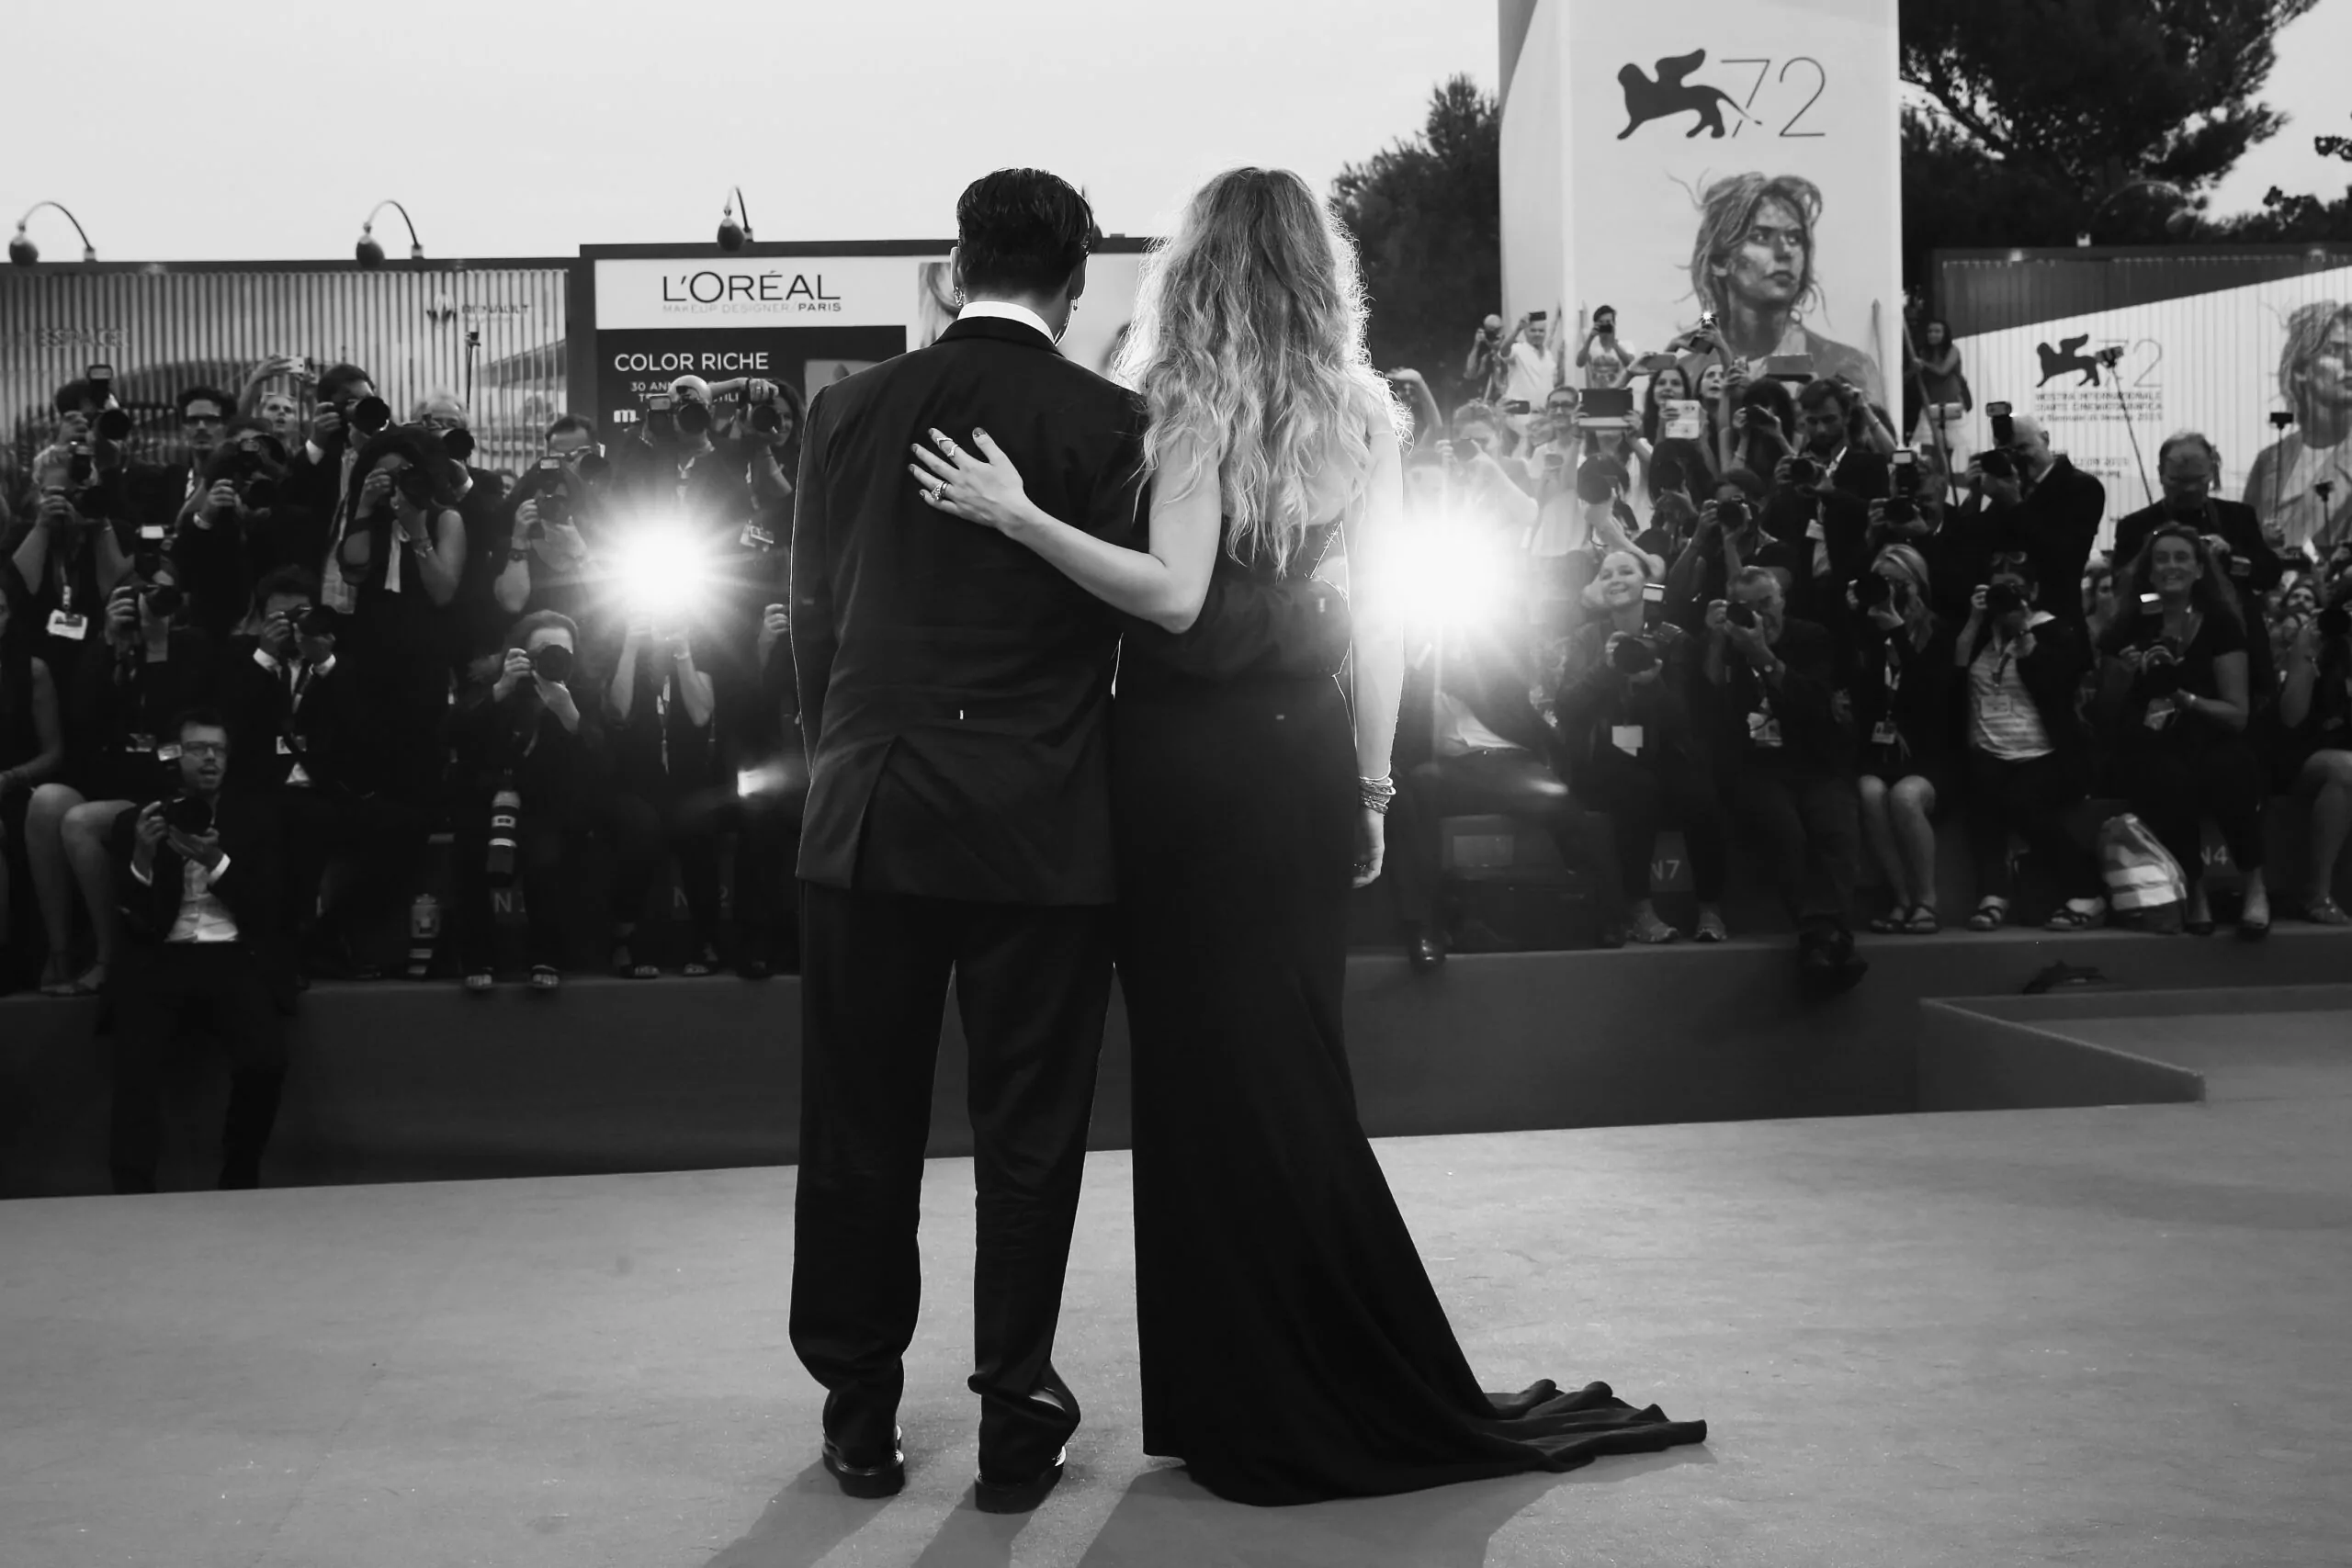 VENICE, ITALY - SEPTEMBER 03: (EDITORS NOTE: Image has been converted to black and white)Johnny Depp and Amber Heard attend a premiere for 'Black Mass' during the 72nd Venice Film Festival on September 4, 2015 in Venice, Italy. (Photo by Vittorio Zunino Celotto/Getty Images)